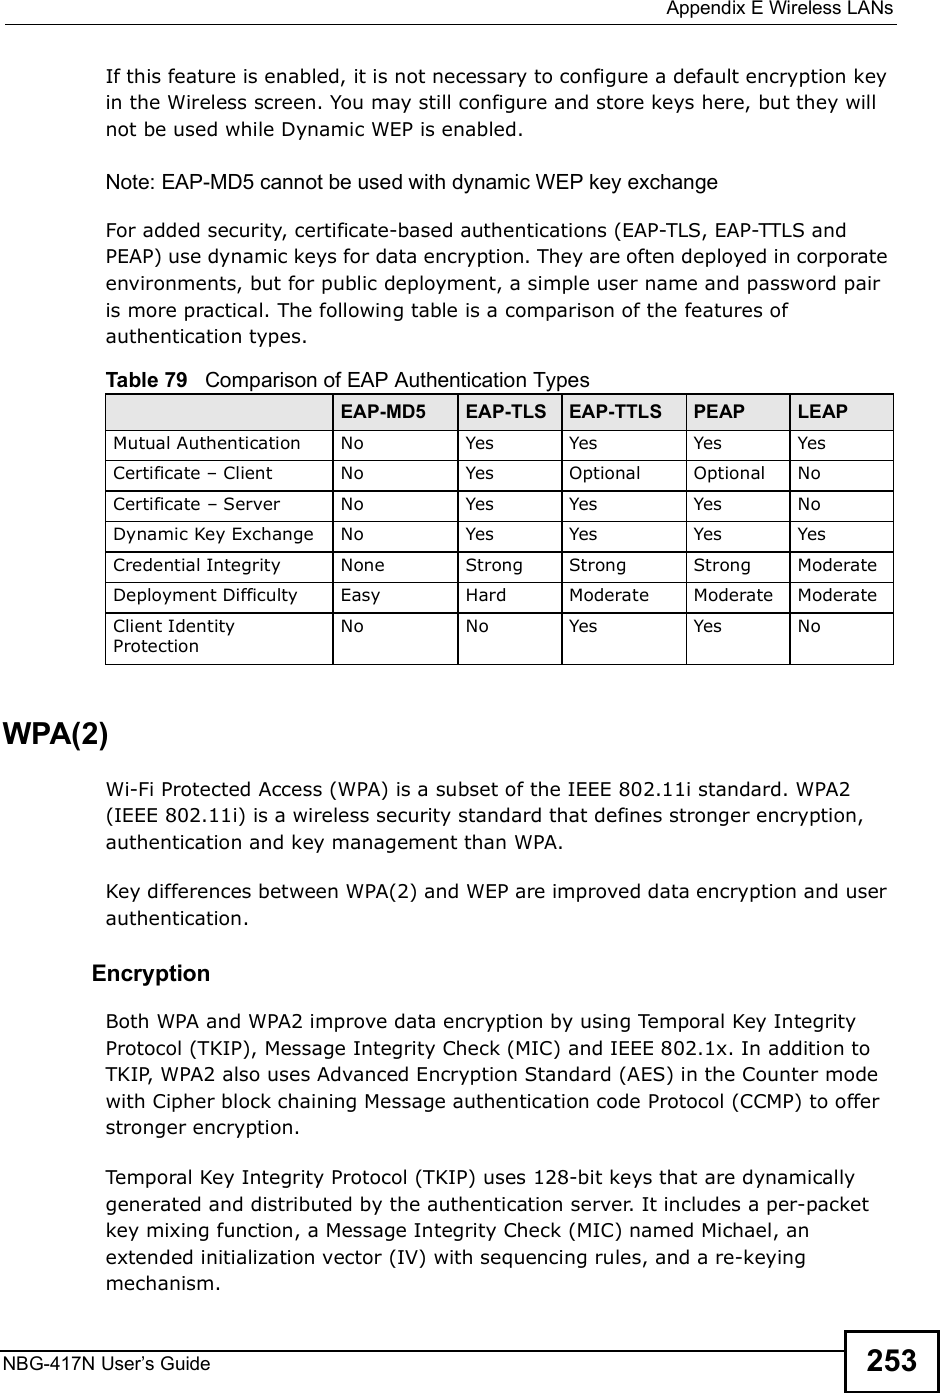  Appendix EWireless LANsNBG-417N User s Guide 253If this feature is enabled, it is not necessary to configure a default encryption key in the Wireless screen. You may still configure and store keys here, but they will not be used while Dynamic WEP is enabled.Note: EAP-MD5 cannot be used with dynamic WEP key exchangeFor added security, certificate-based authentications (EAP-TLS, EAP-TTLS and PEAP) use dynamic keys for data encryption. They are often deployed in corporate environments, but for public deployment, a simple user name and password pair is more practical. The following table is a comparison of the features of authentication types.WPA(2)Wi-Fi Protected Access (WPA) is a subset of the IEEE 802.11i standard. WPA2 (IEEE 802.11i) is a wireless security standard that defines stronger encryption, authentication and key management than WPA. Key differences between WPA(2) and WEP are improved data encryption and user authentication.              EncryptionBoth WPA and WPA2 improve data encryption by using Temporal Key Integrity Protocol (TKIP), Message Integrity Check (MIC) and IEEE 802.1x. In addition to TKIP, WPA2 also uses Advanced Encryption Standard (AES) in the Counter mode with Cipher block chaining Message authentication code Protocol (CCMP) to offer stronger encryption. Temporal Key Integrity Protocol (TKIP) uses 128-bit keys that are dynamically generated and distributed by the authentication server. It includes a per-packet key mixing function, a Message Integrity Check (MIC) named Michael, an extended initialization vector (IV) with sequencing rules, and a re-keying mechanism.Table 79   Comparison of EAP Authentication TypesEAP-MD5 EAP-TLS EAP-TTLS PEAP LEAPMutual Authentication No Yes Yes Yes YesCertificate $ Client No Yes Optional Optional NoCertificate $ Server No Yes Yes Yes NoDynamic Key Exchange No Yes Yes Yes YesCredential Integrity None Strong Strong Strong ModerateDeployment Difficulty Easy Hard Moderate Moderate ModerateClient Identity ProtectionNo No Yes Yes No